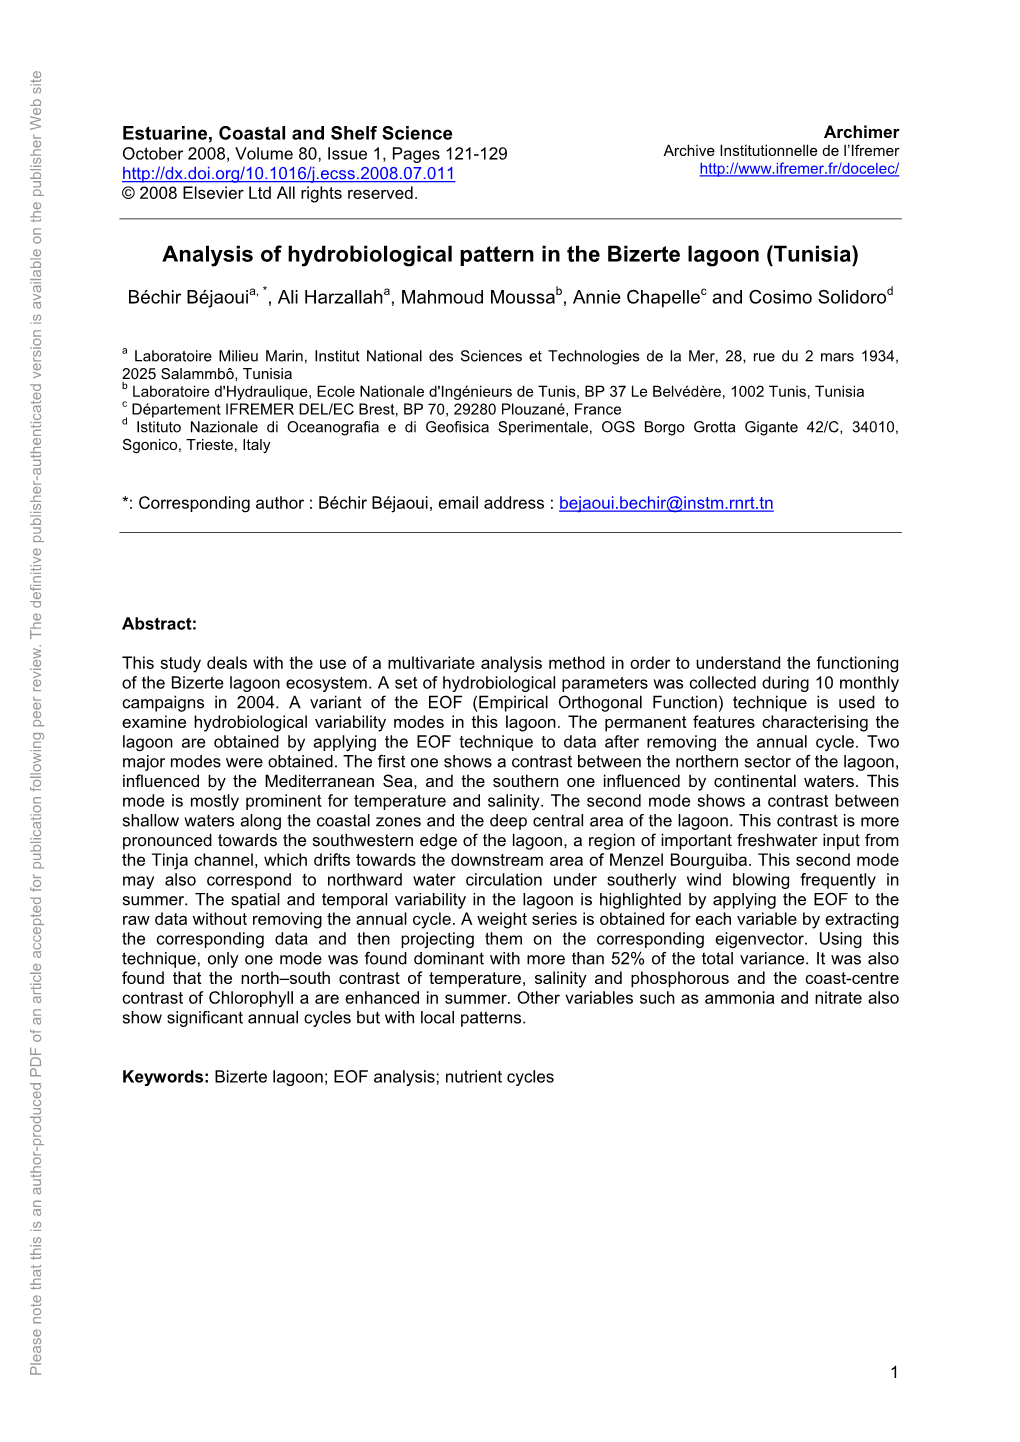 Analysis of Hydrobiological Pattern in the Bizerte Lagoon